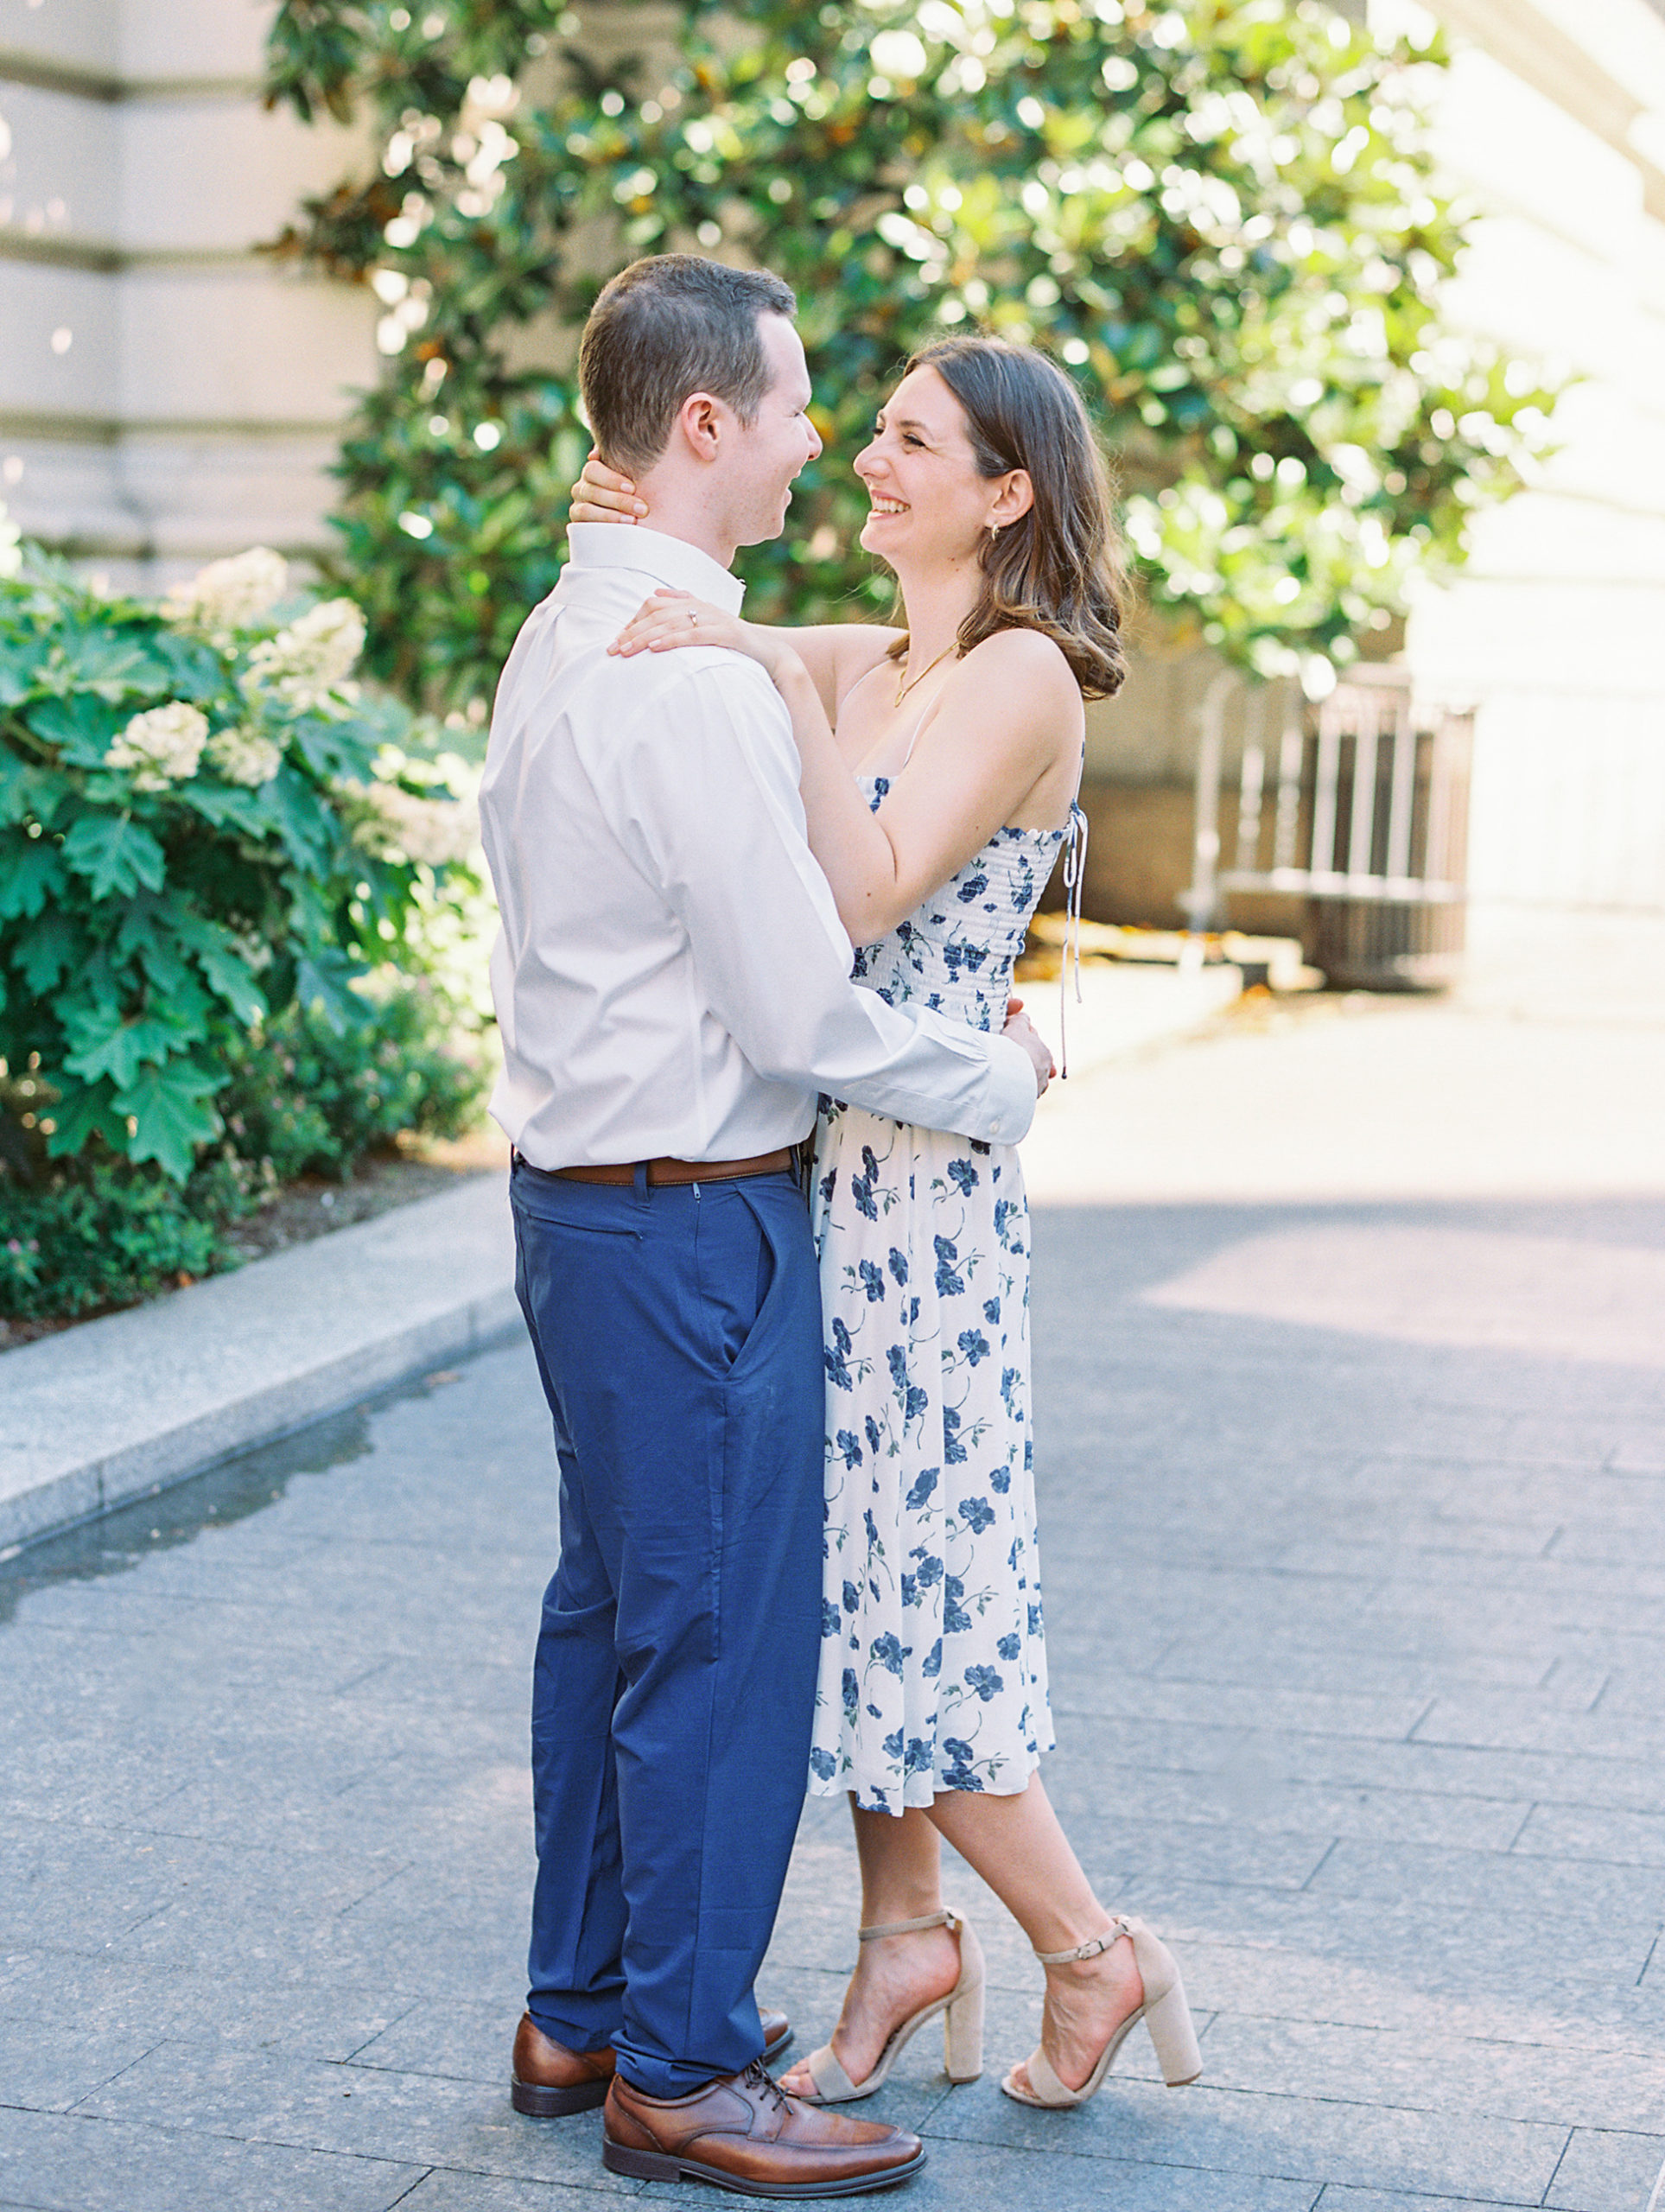 Couple embraces and laughs on pathway with white hydrangeas and trees